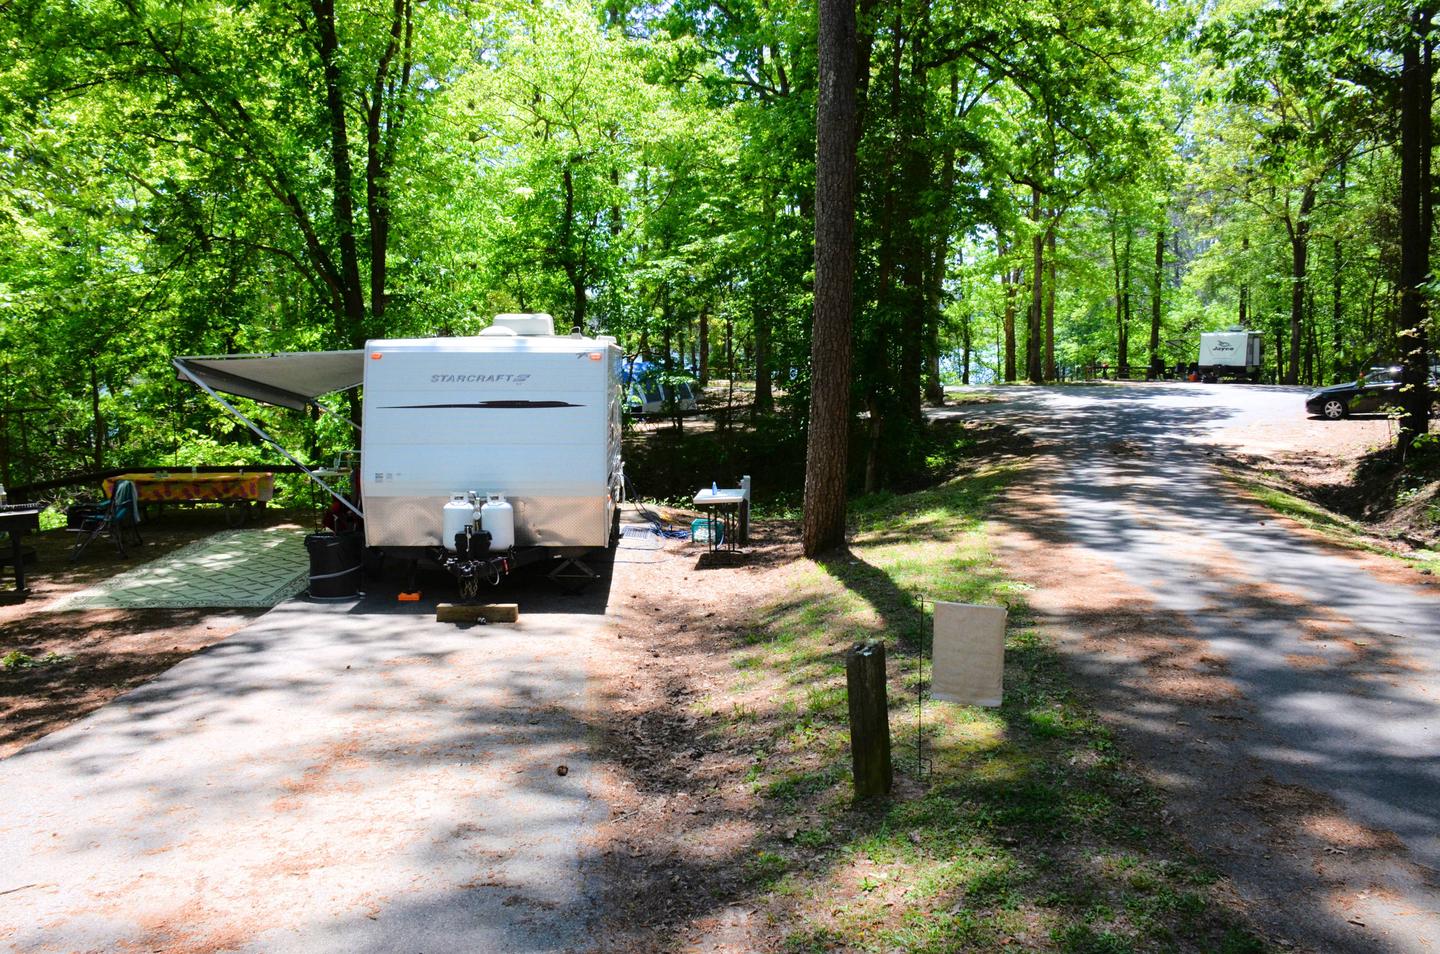 Driveway entrance angle/slope, utilities-side clearance.McKinney Campground, campsite 147.